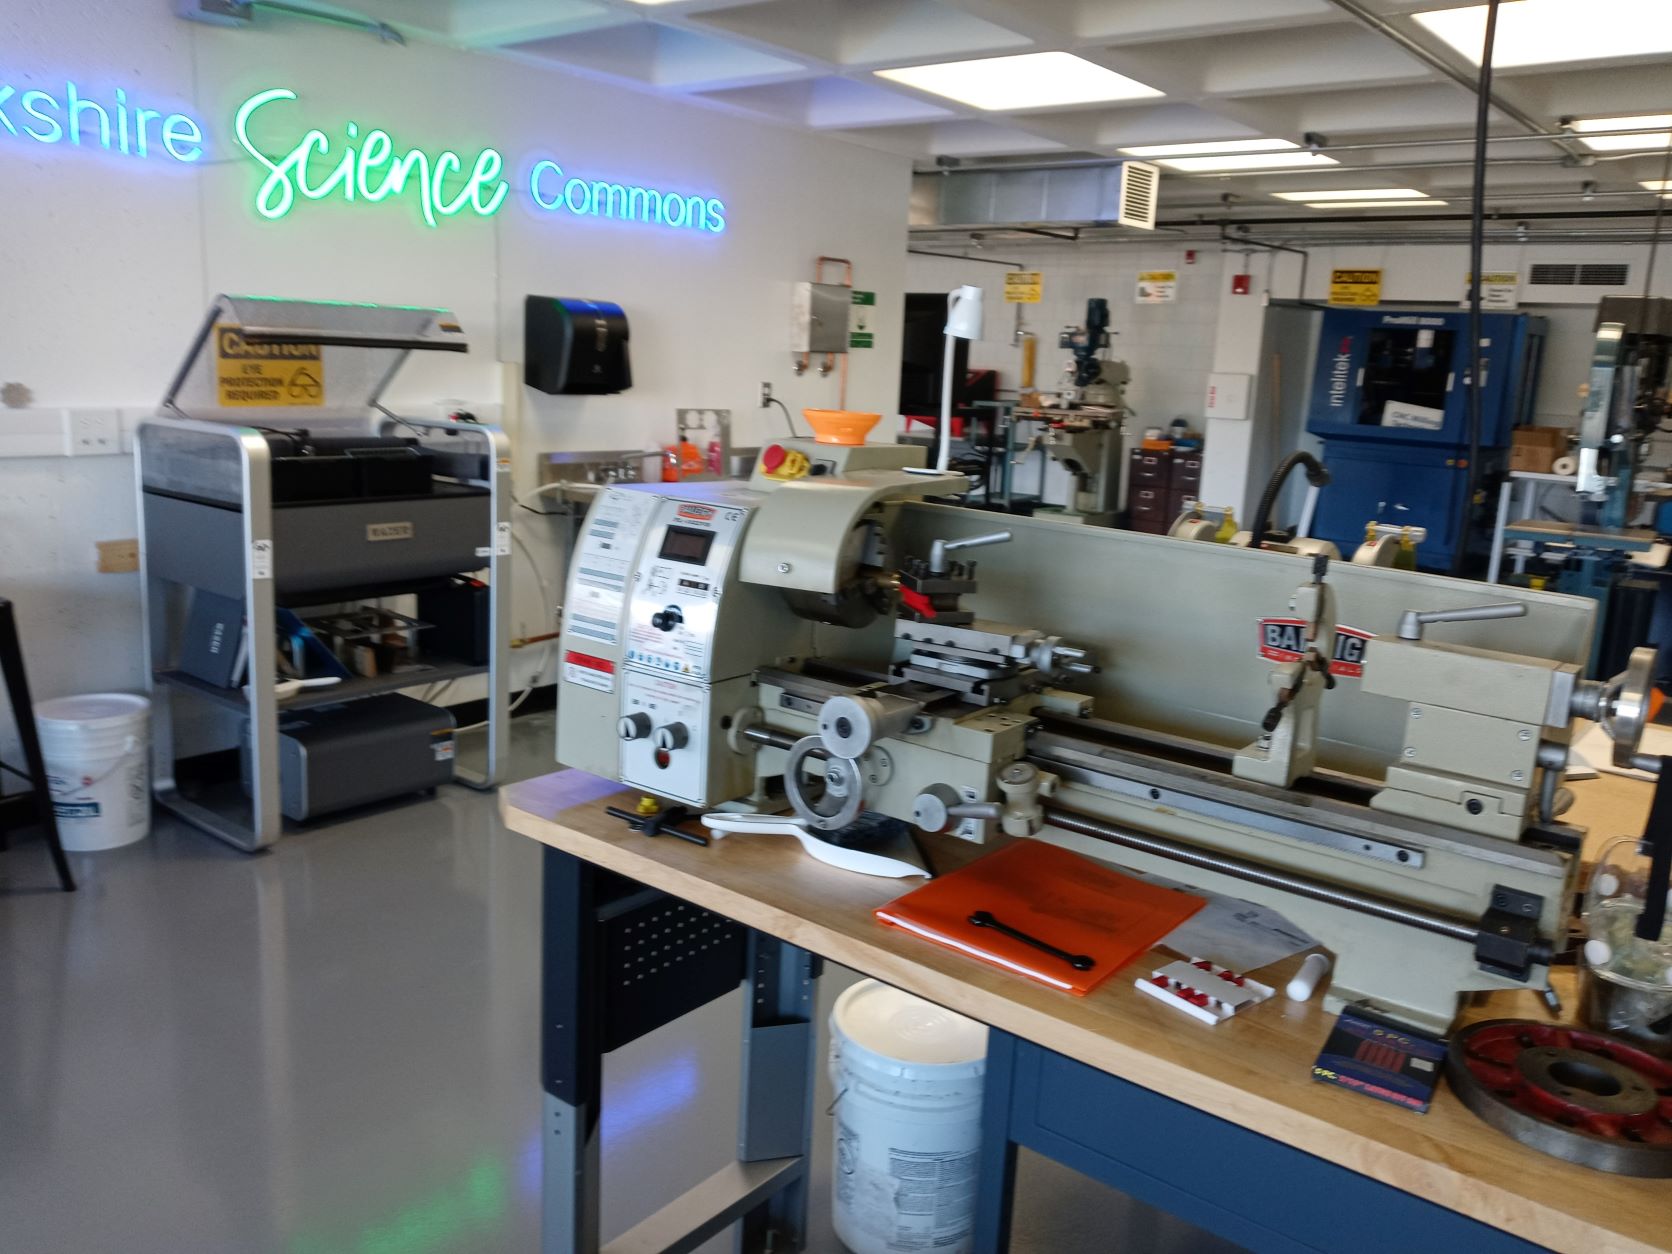 Berkshire Science Commons with neon sign and several machines